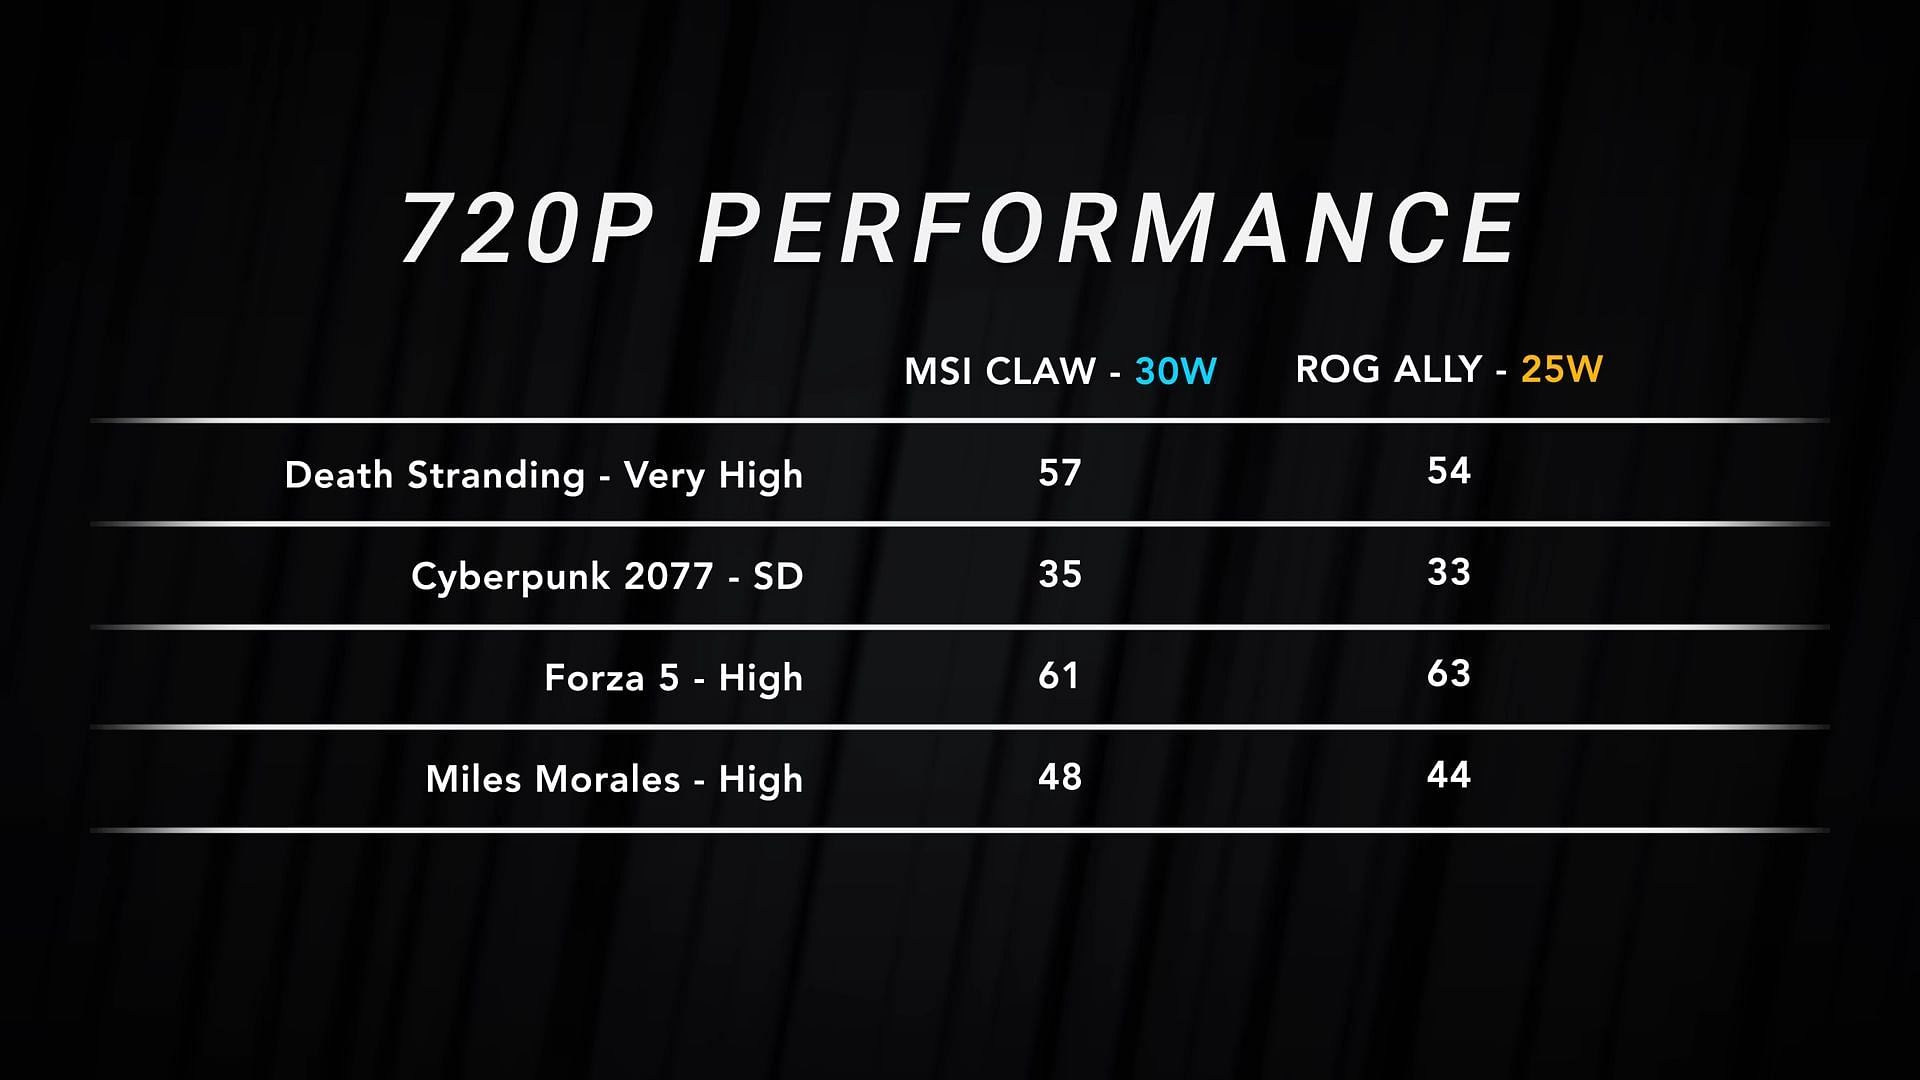 MSI Claw vs ROG Ally at 720p across a wide range of games (Image via YouTube/Dave2D)